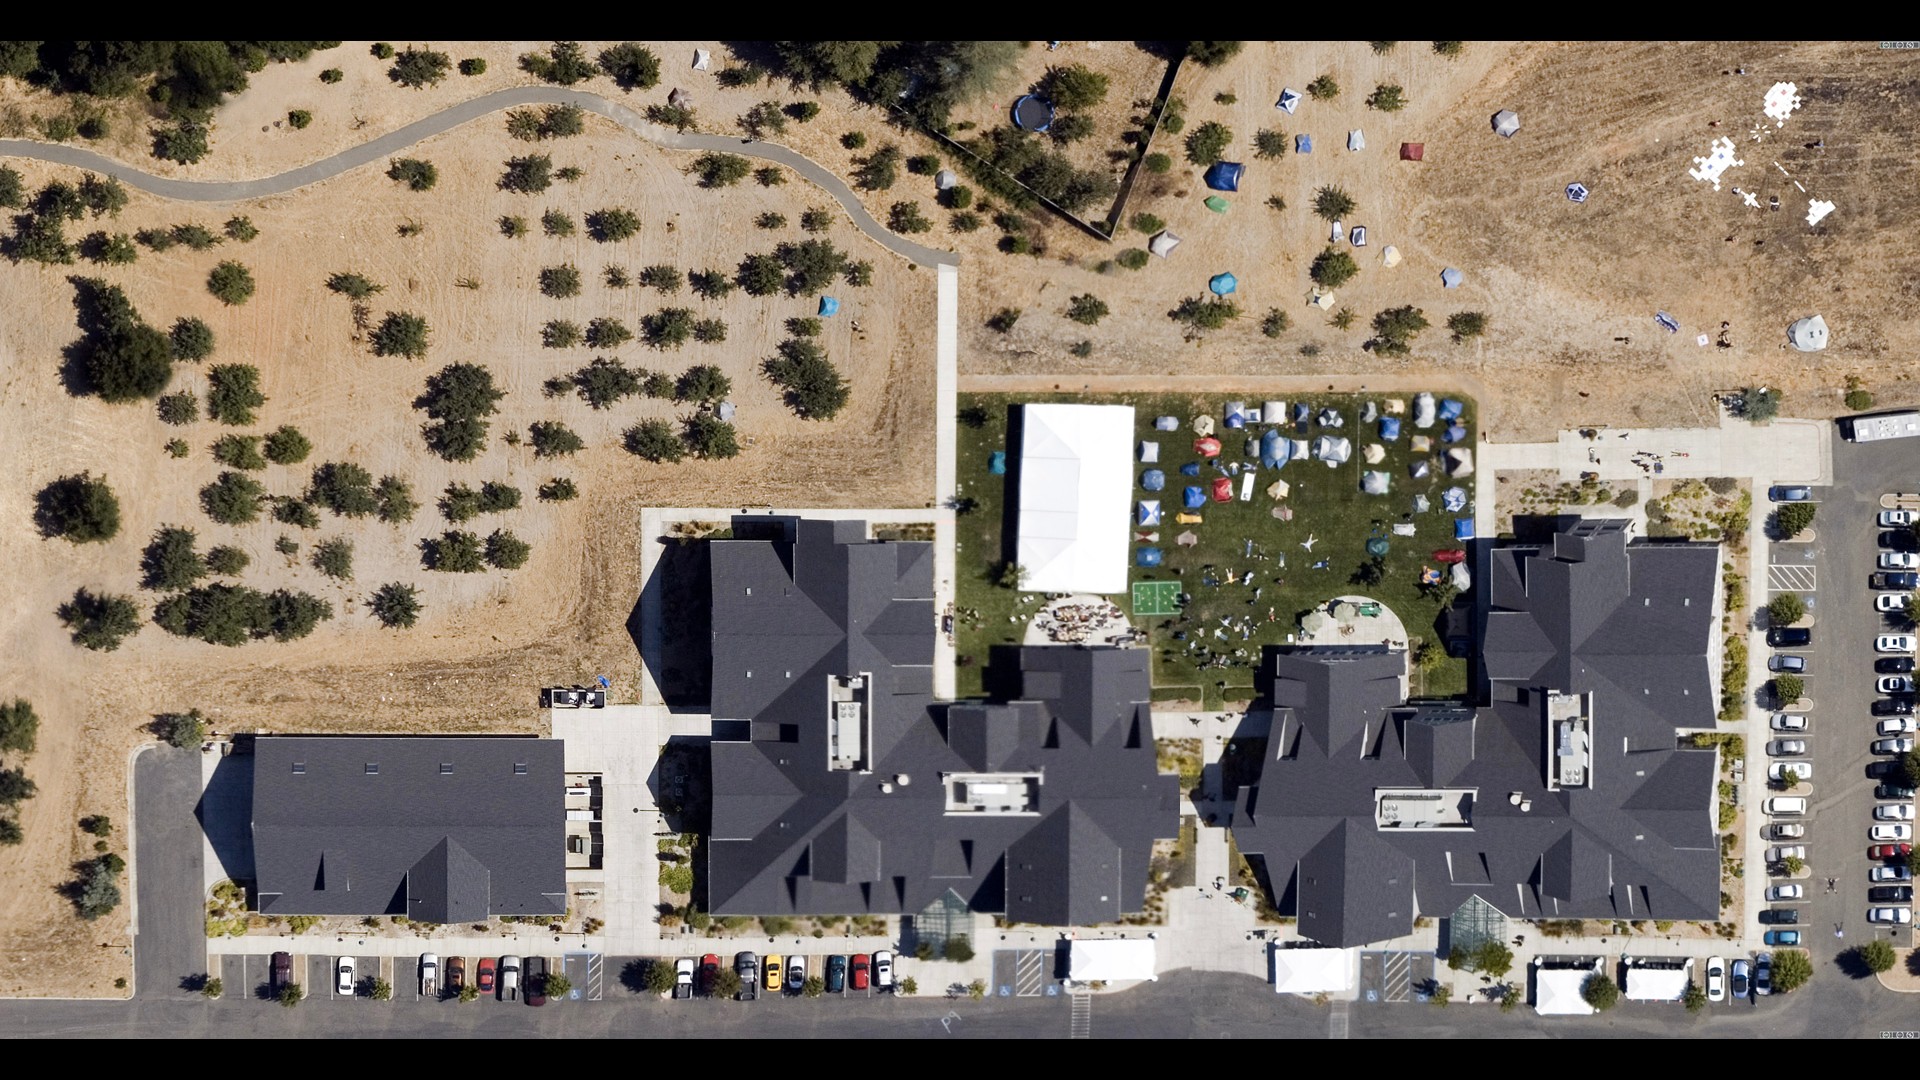 Sky view shot of Foo Camp, where buildings and tents can be seen.